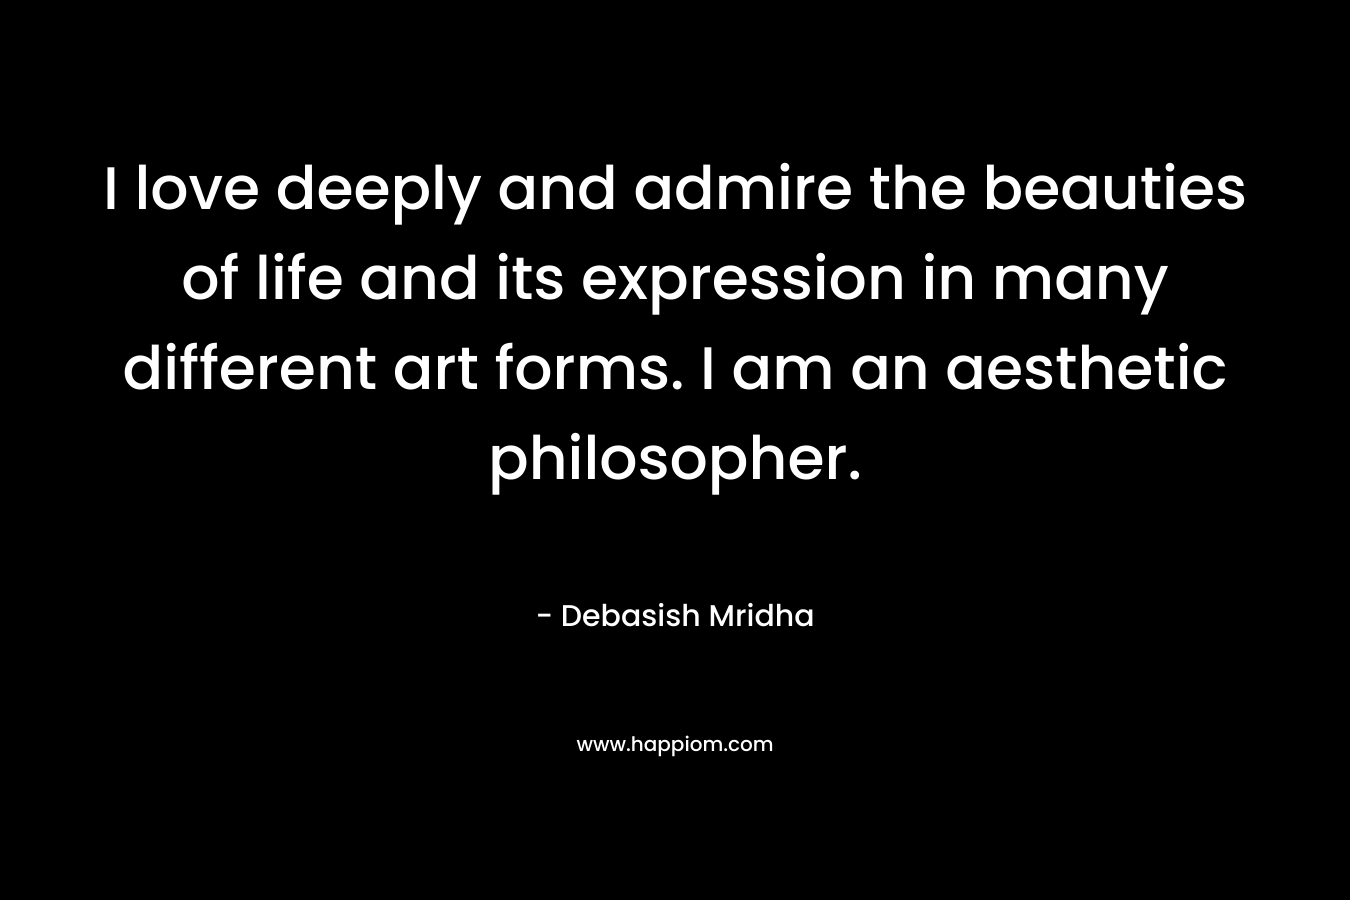 I love deeply and admire the beauties of life and its expression in many different art forms. I am an aesthetic philosopher. – Debasish Mridha